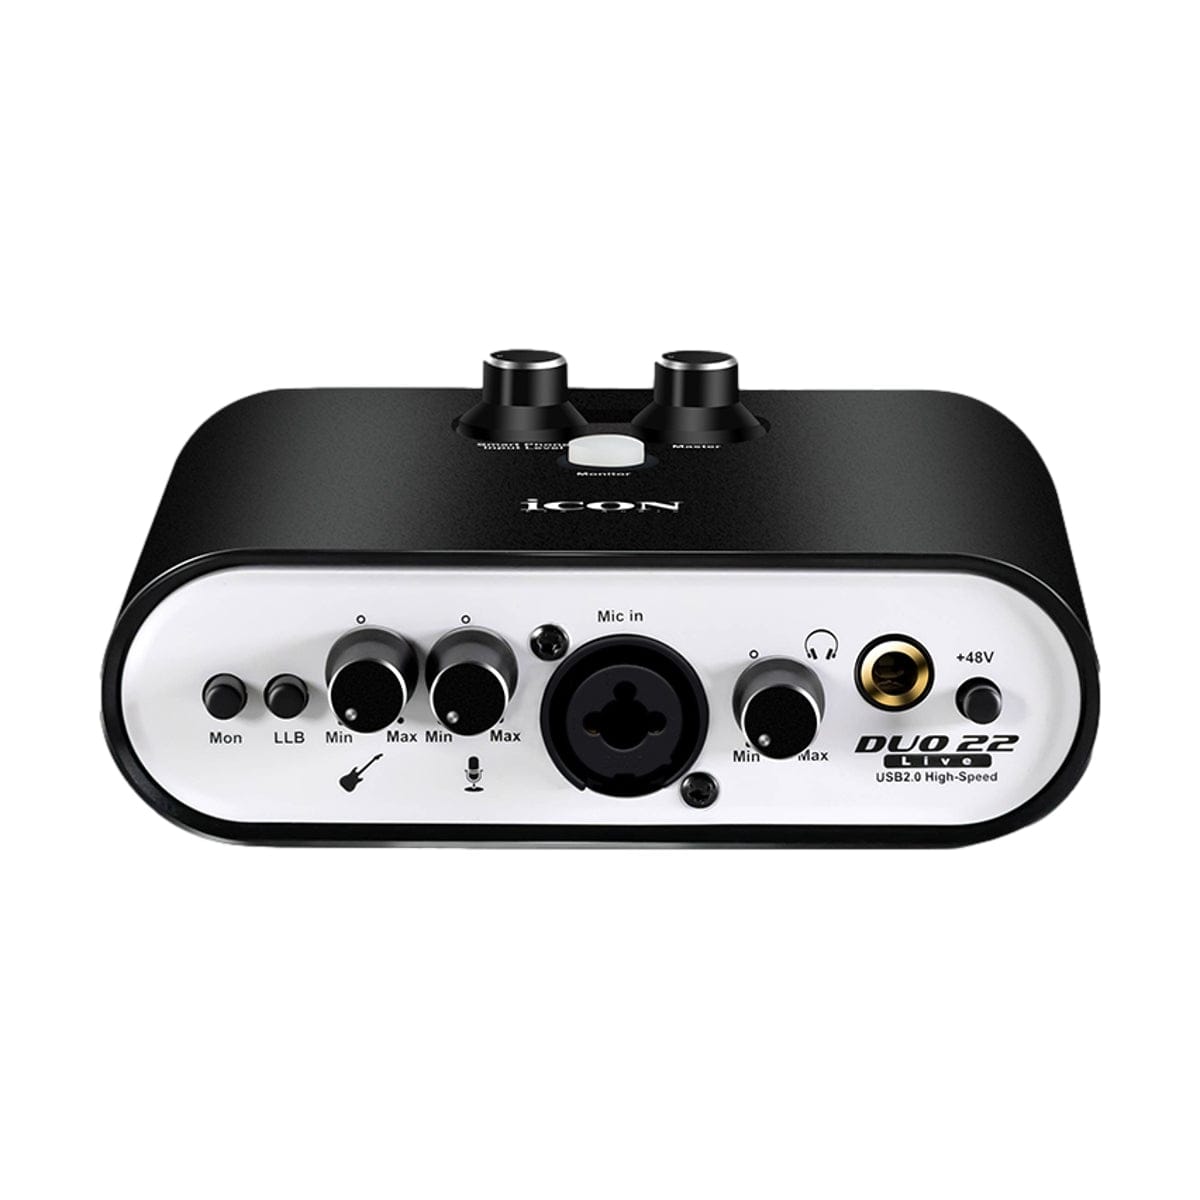 Icon Recording Icon Duo22 Live Audio Interface USB 1 In/2 Out ICO-DUO22LIVE - Byron Music